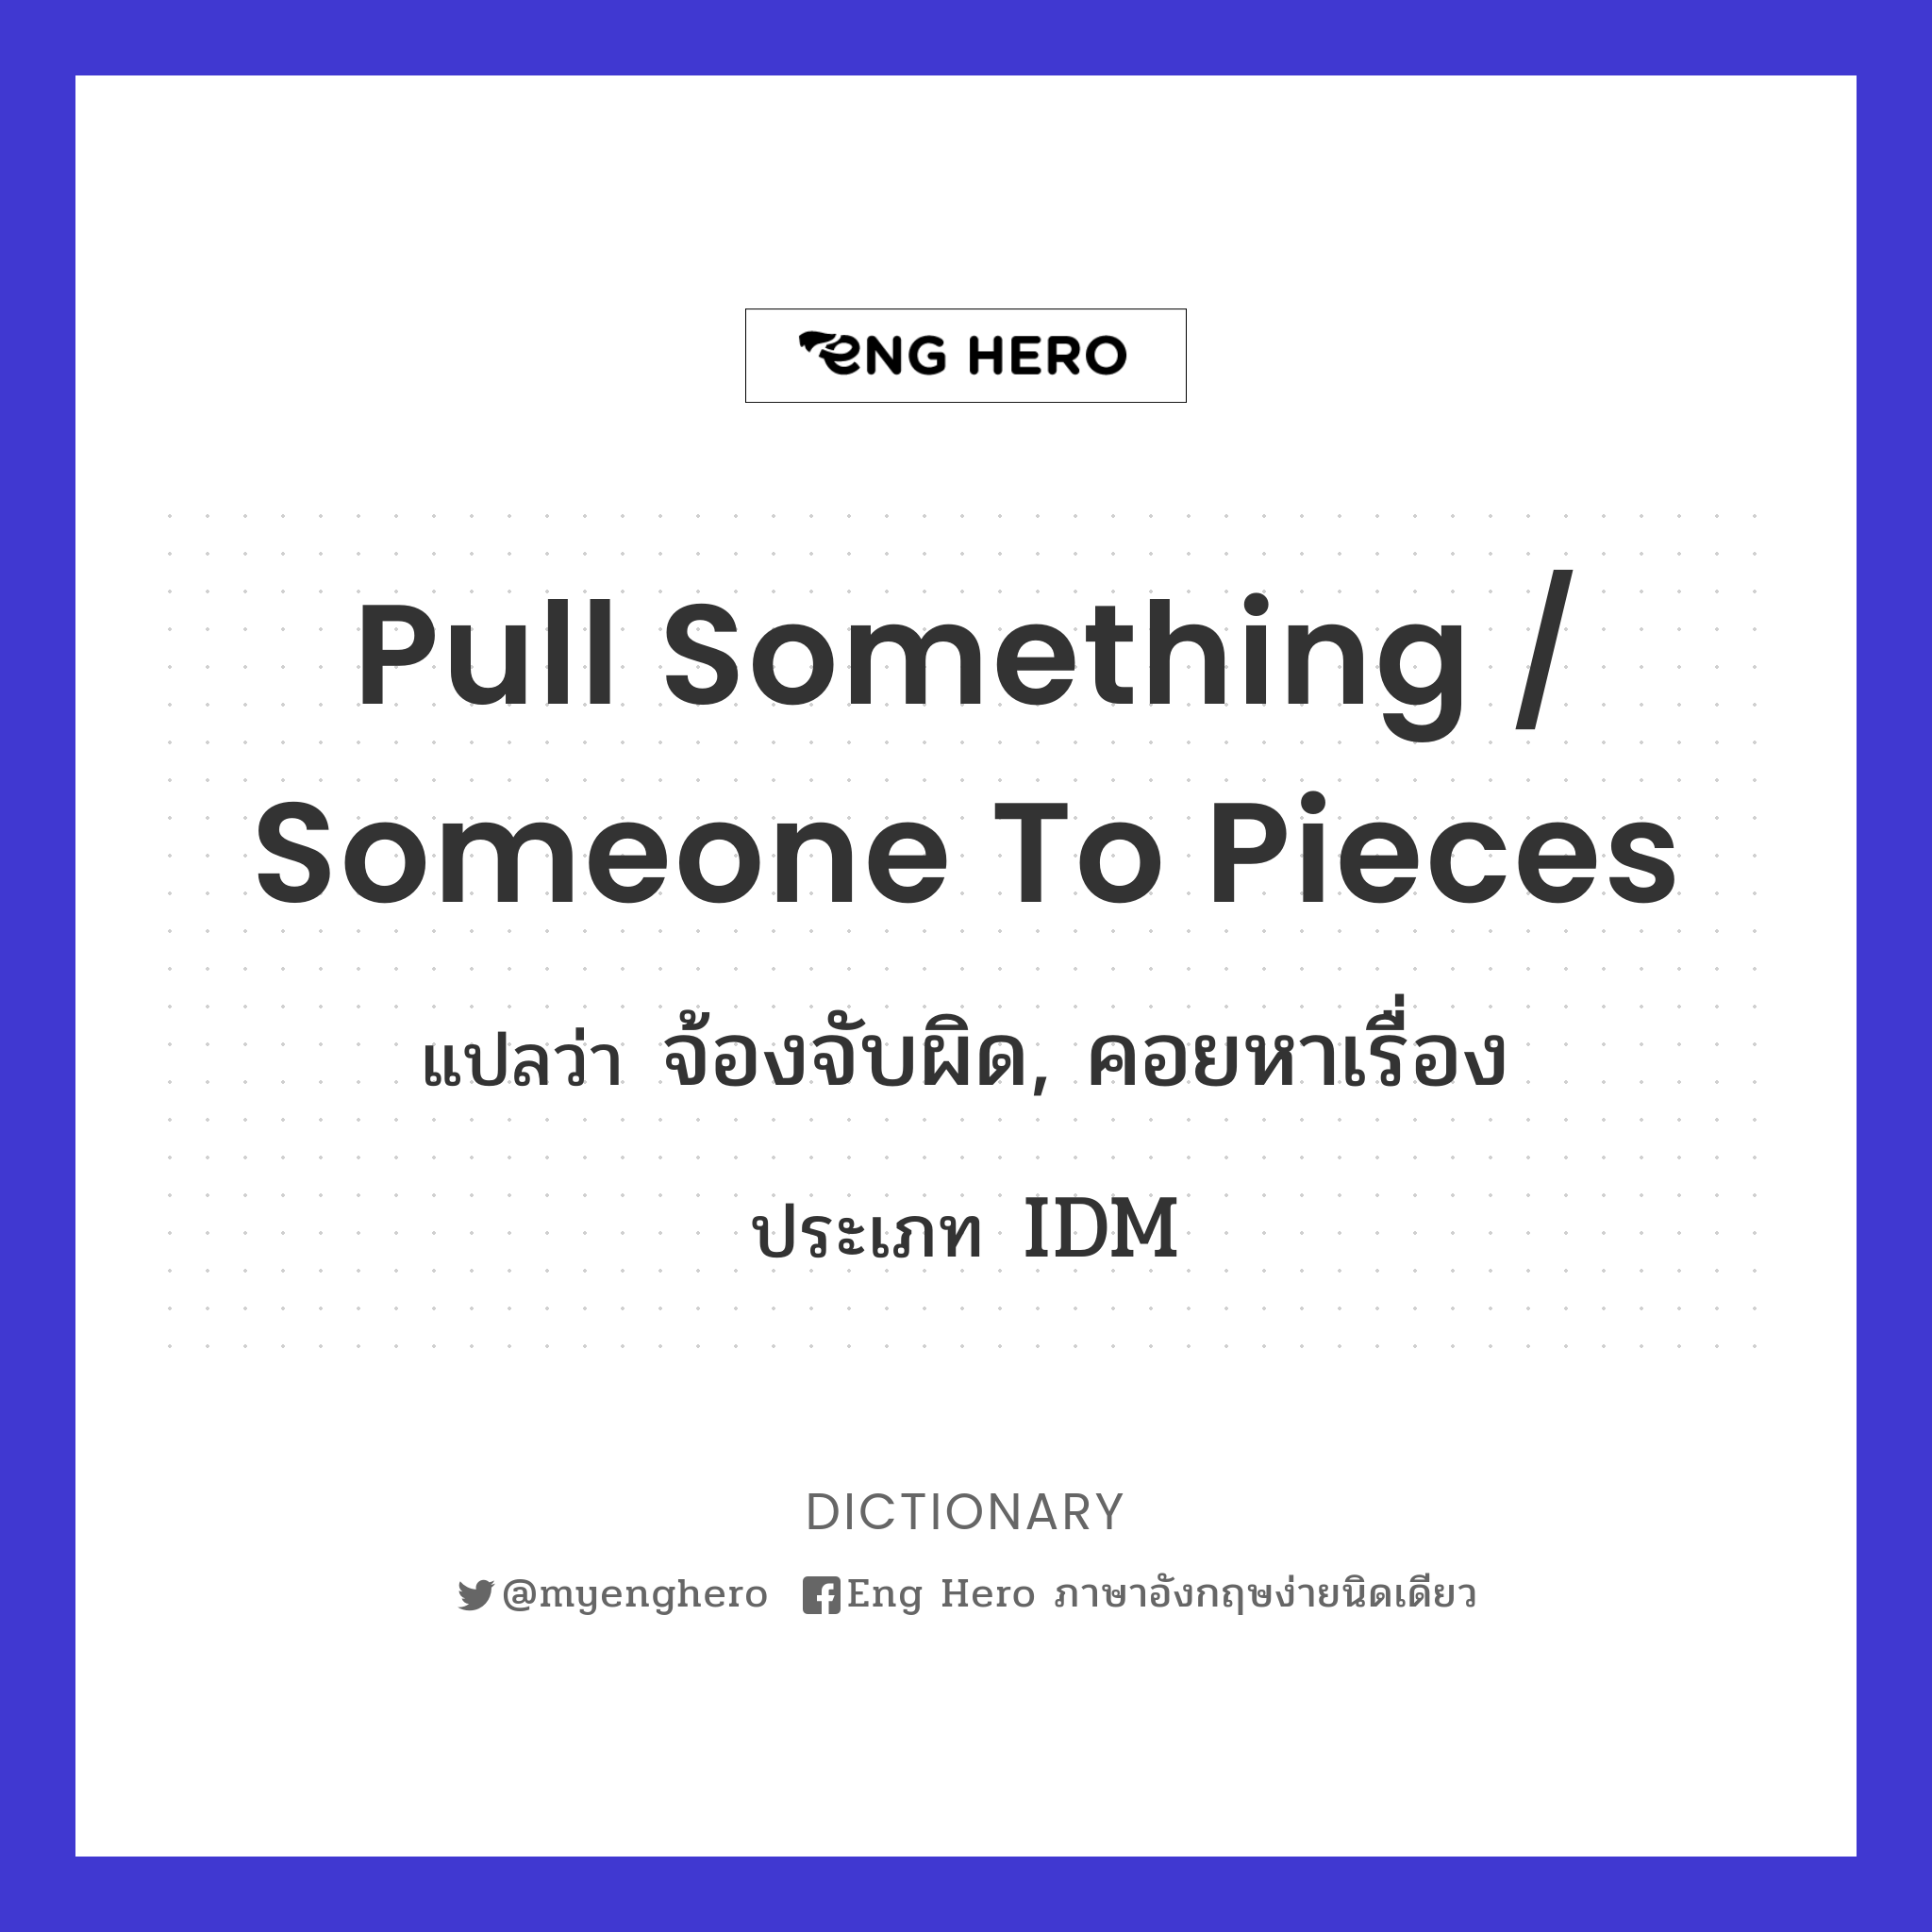 pull something / someone to pieces